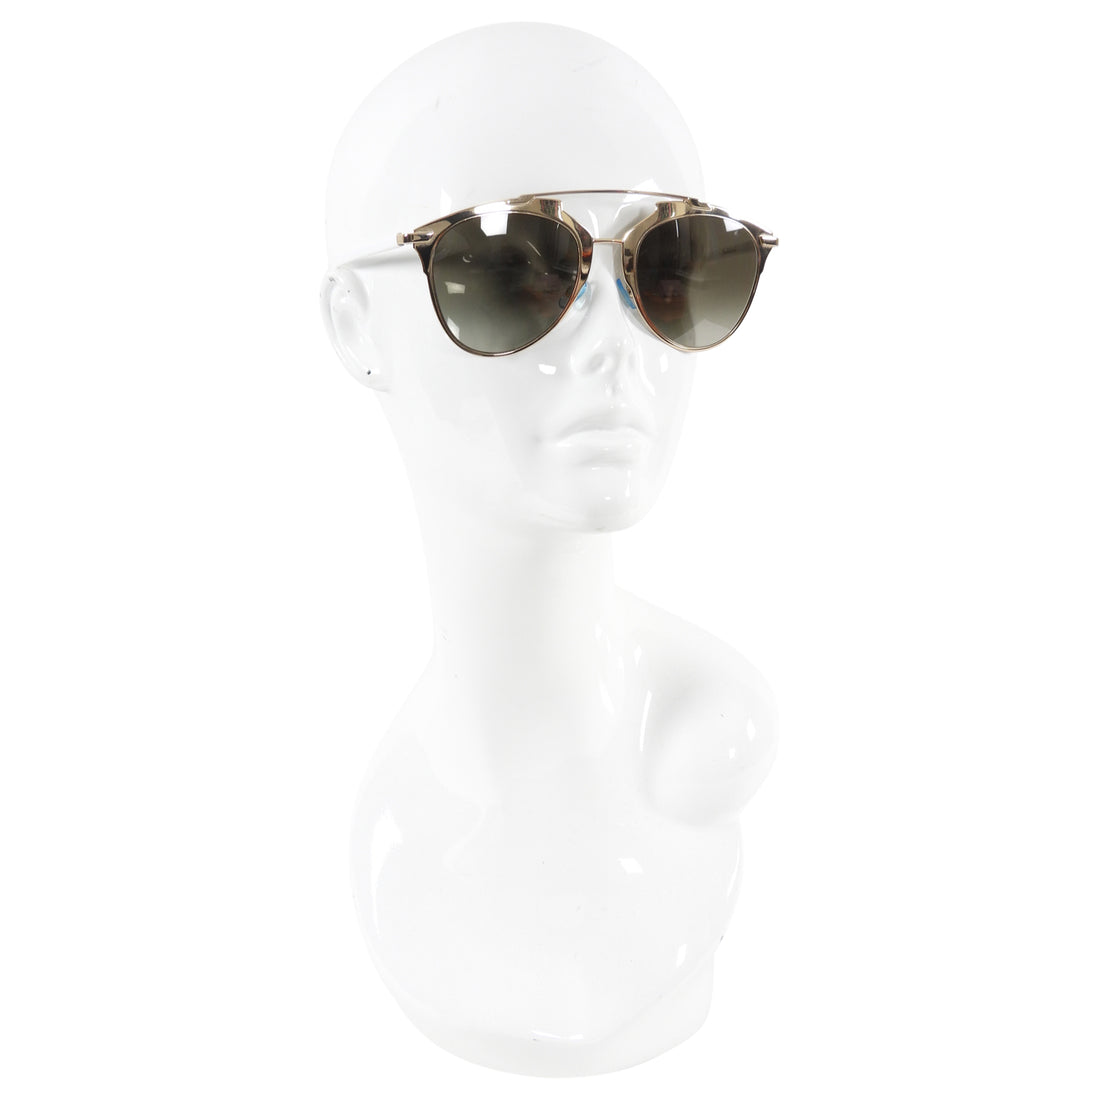 Dior Reflected Gold Sunglasses with White Arms